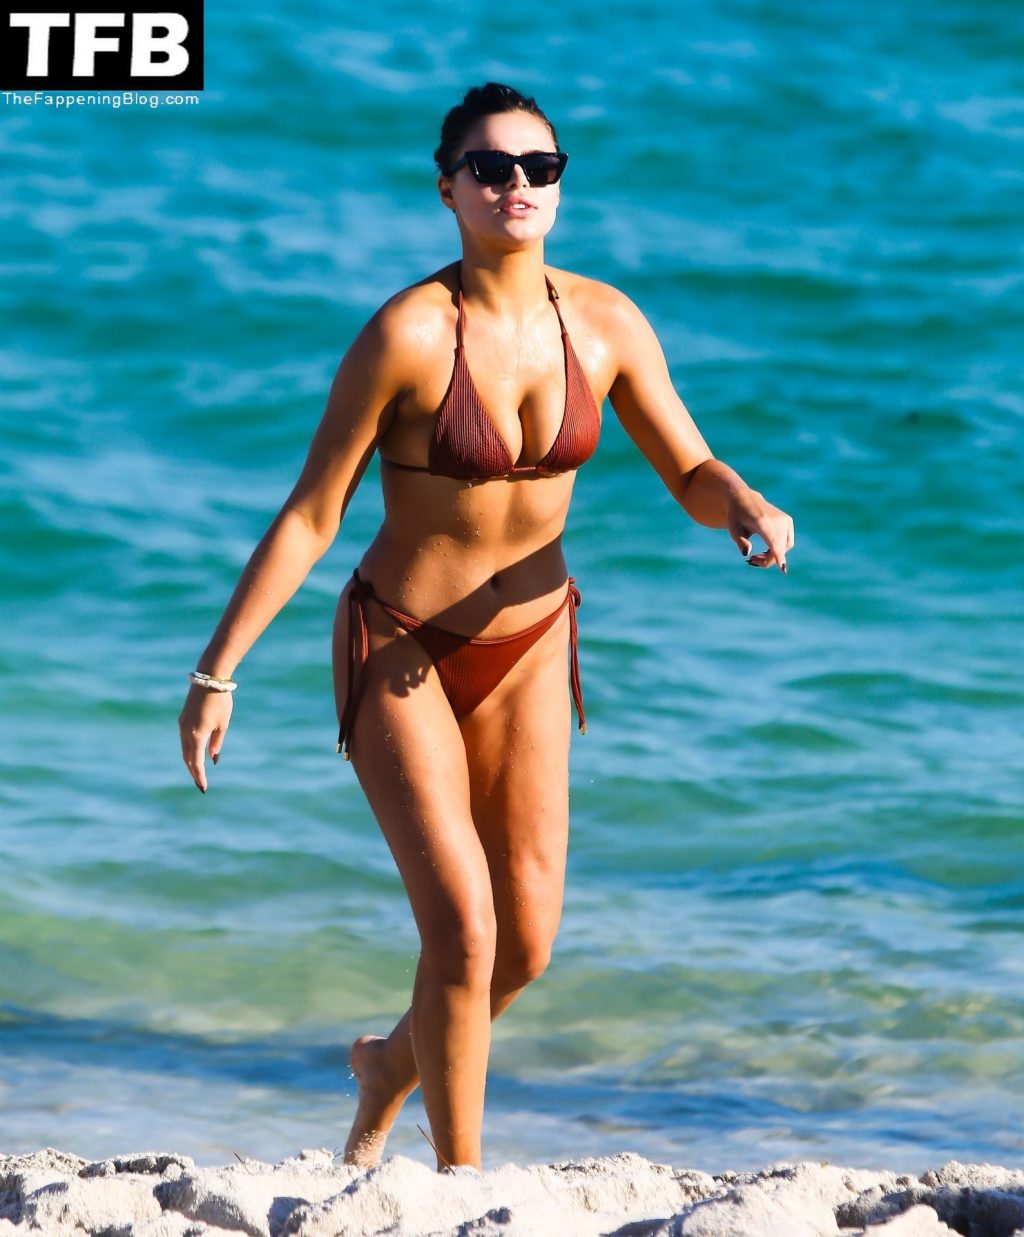 Brooks Nader Puts Her Fit Body on Full Display in Miami Beach (62 Photos)